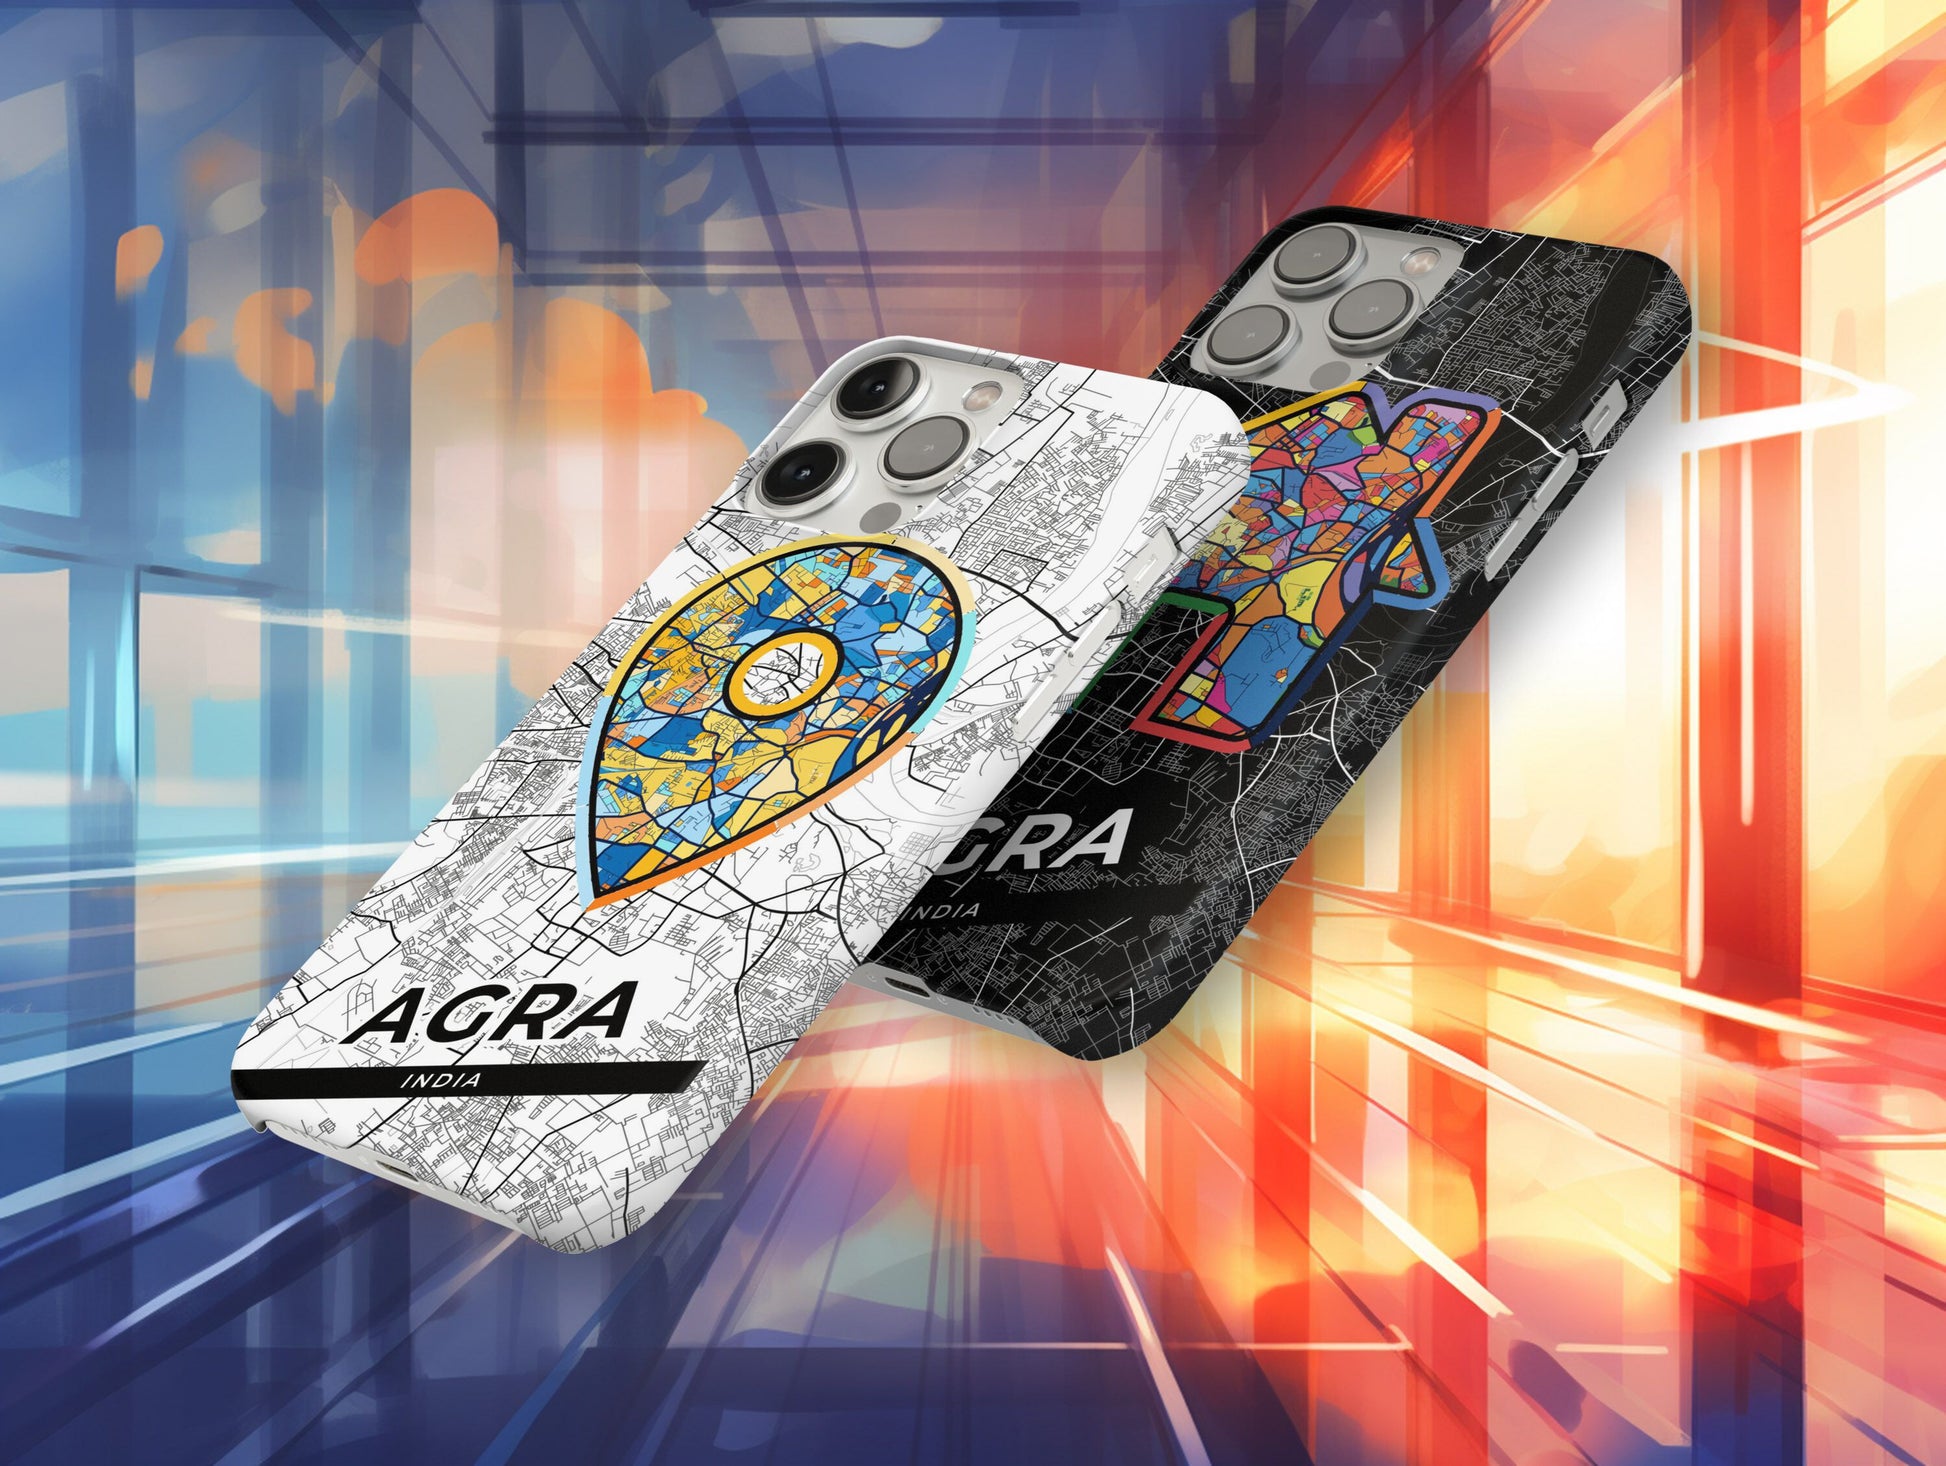 Agra India slim phone case with colorful icon. Birthday, wedding or housewarming gift. Couple match cases.